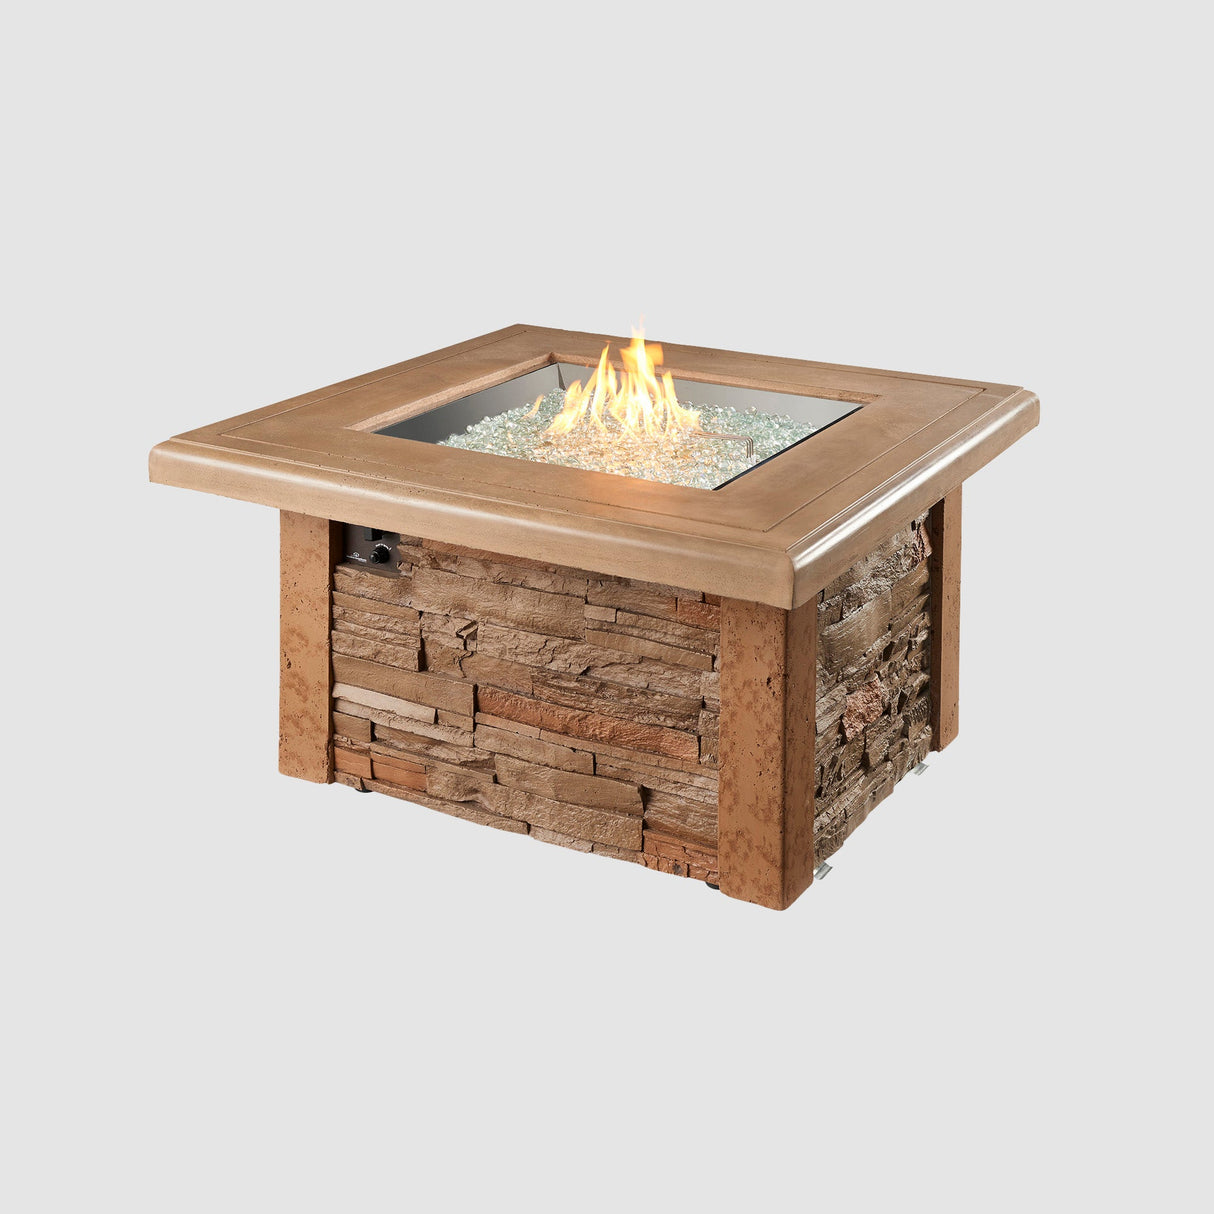 Sierra Square Gas Fire Pit Table on a grey background